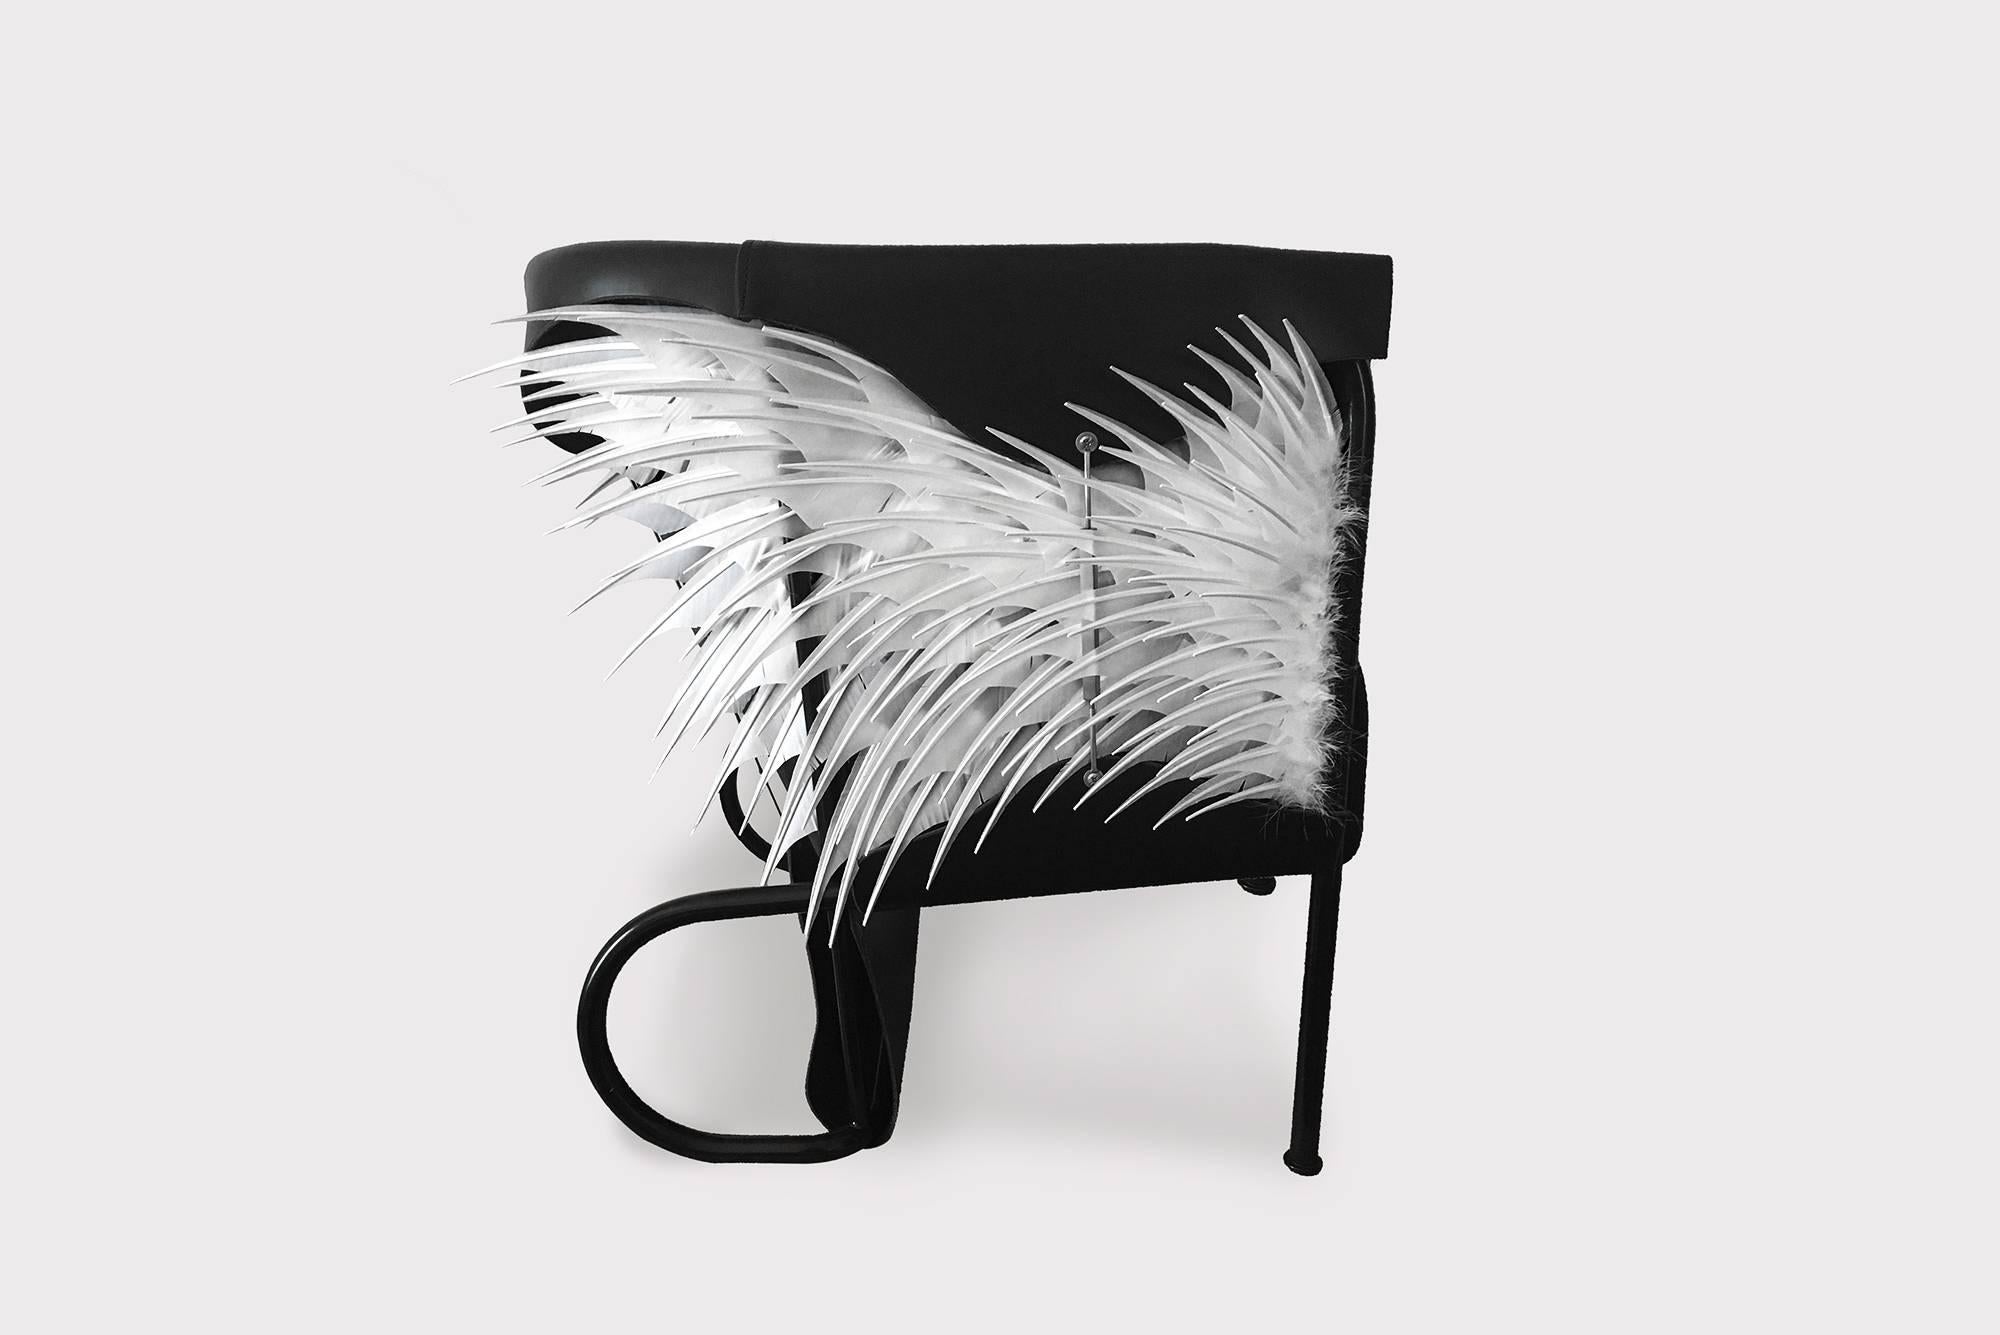 In the first edition of the ‘Club Chair’ (2016) the designer Glen Baghurst drew inspiration from high fashion and English saddlery and applied this to create his leather draped armchair. 

This second edition is a limited release and is designed